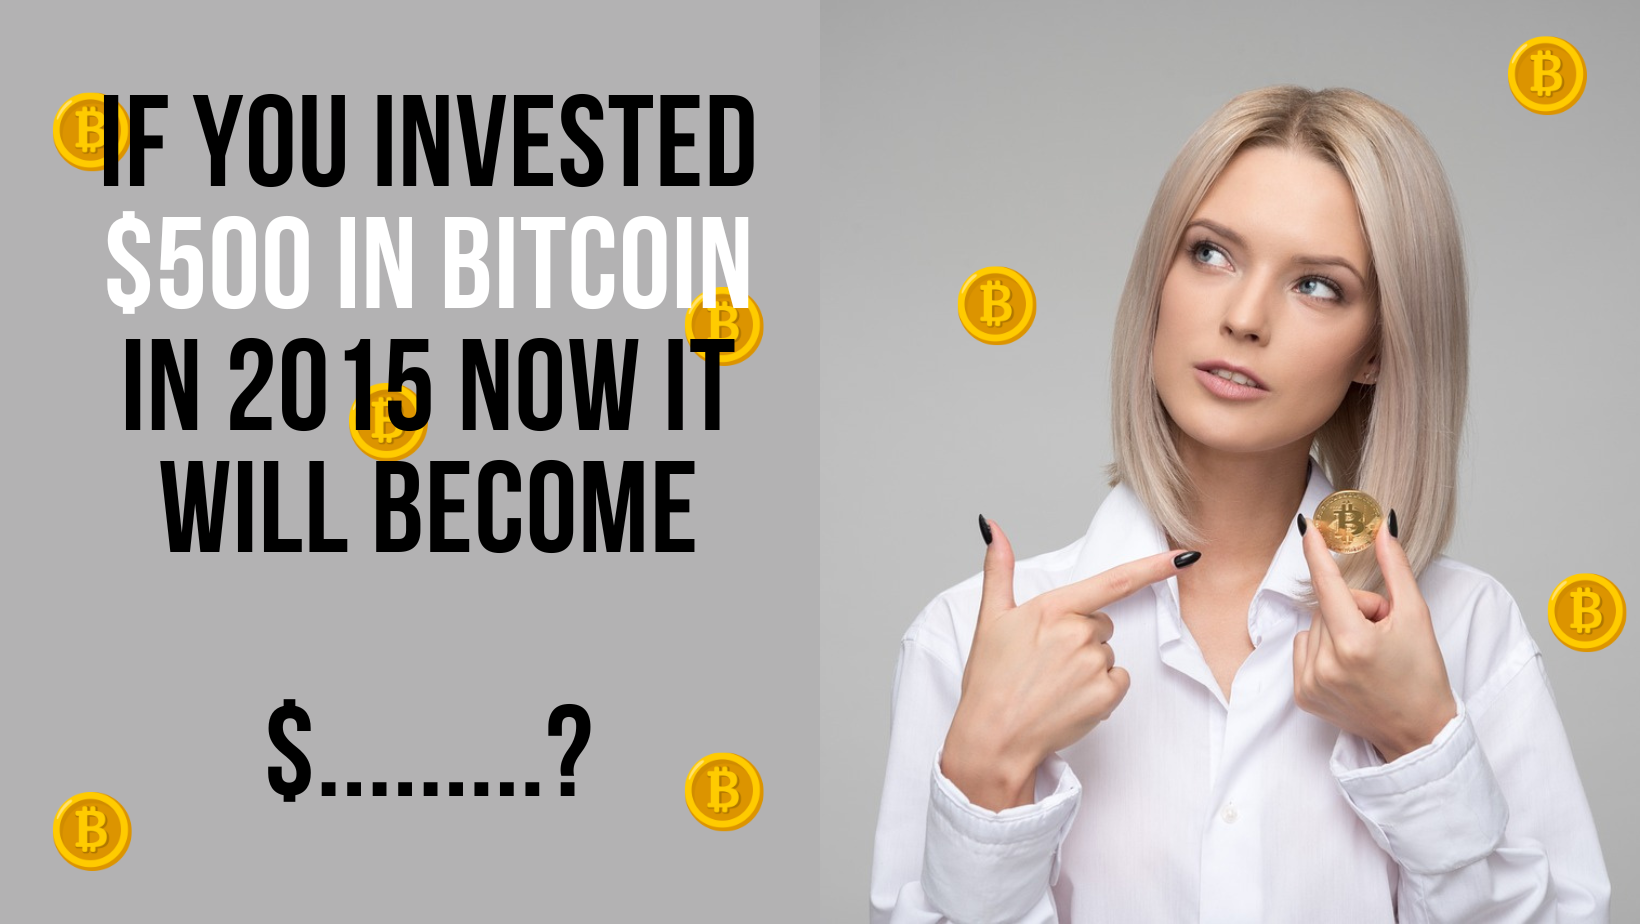 If You Invested $500 in Bitcoin in 2015 Now It Will Become